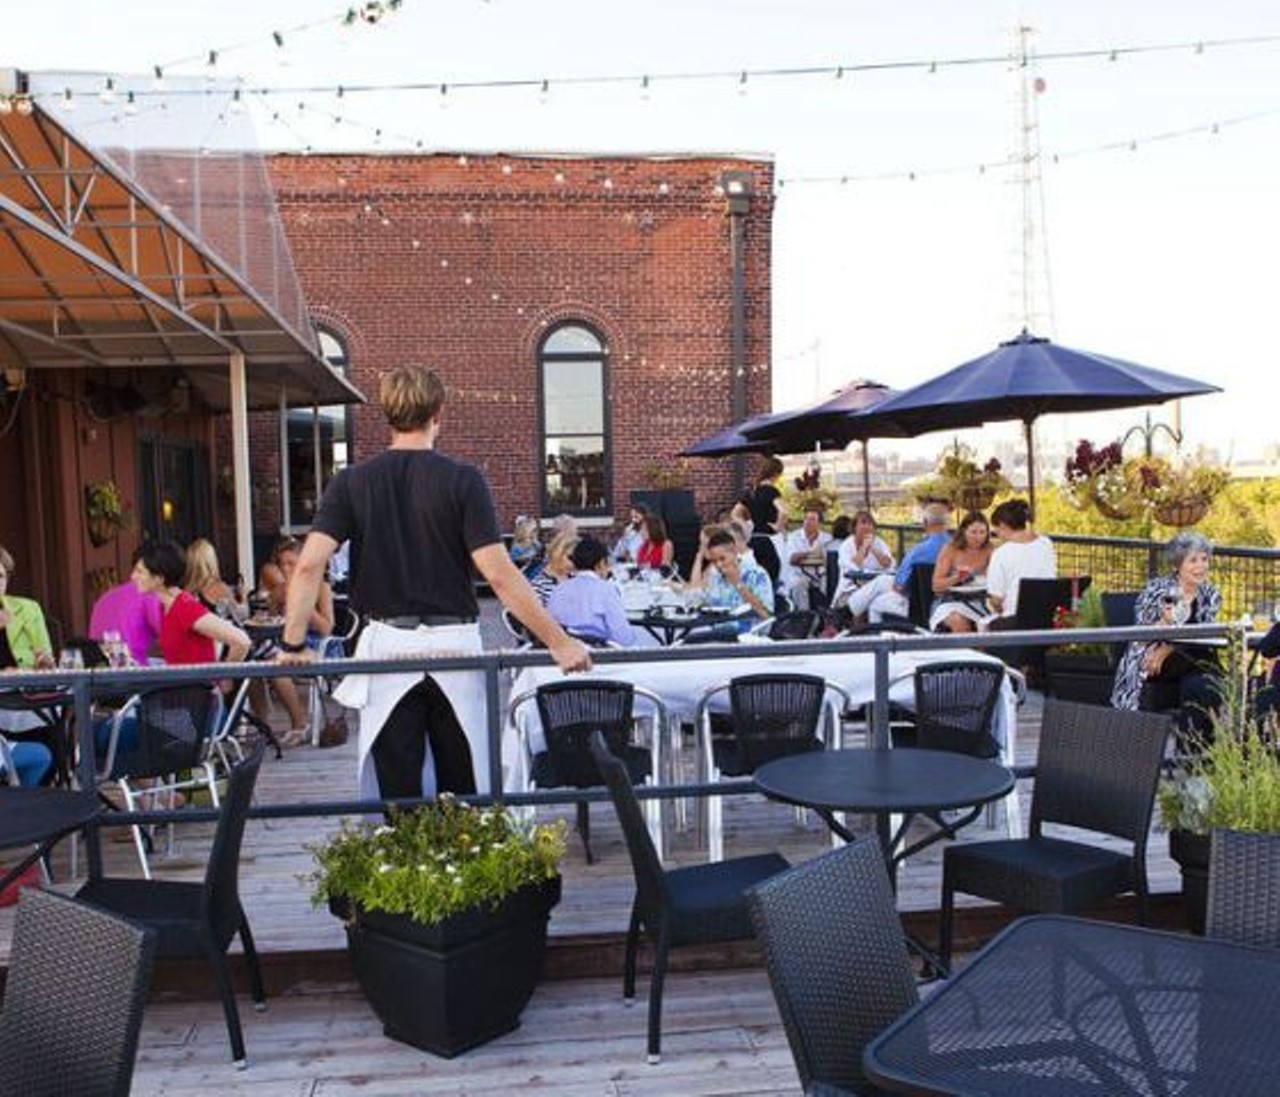 Vin de Set
2017 Chouteau Ave.
St. Louis, MO 63103
(314) 241-8989
This upscale rooftop bar and bistro has outdoor seating with a beautiful view, not to mention mouthwatering French food and an extensive wine list. Dress to impress; it&#146;s a special day when you go to Vin de Set. Photo by Laura Miller.